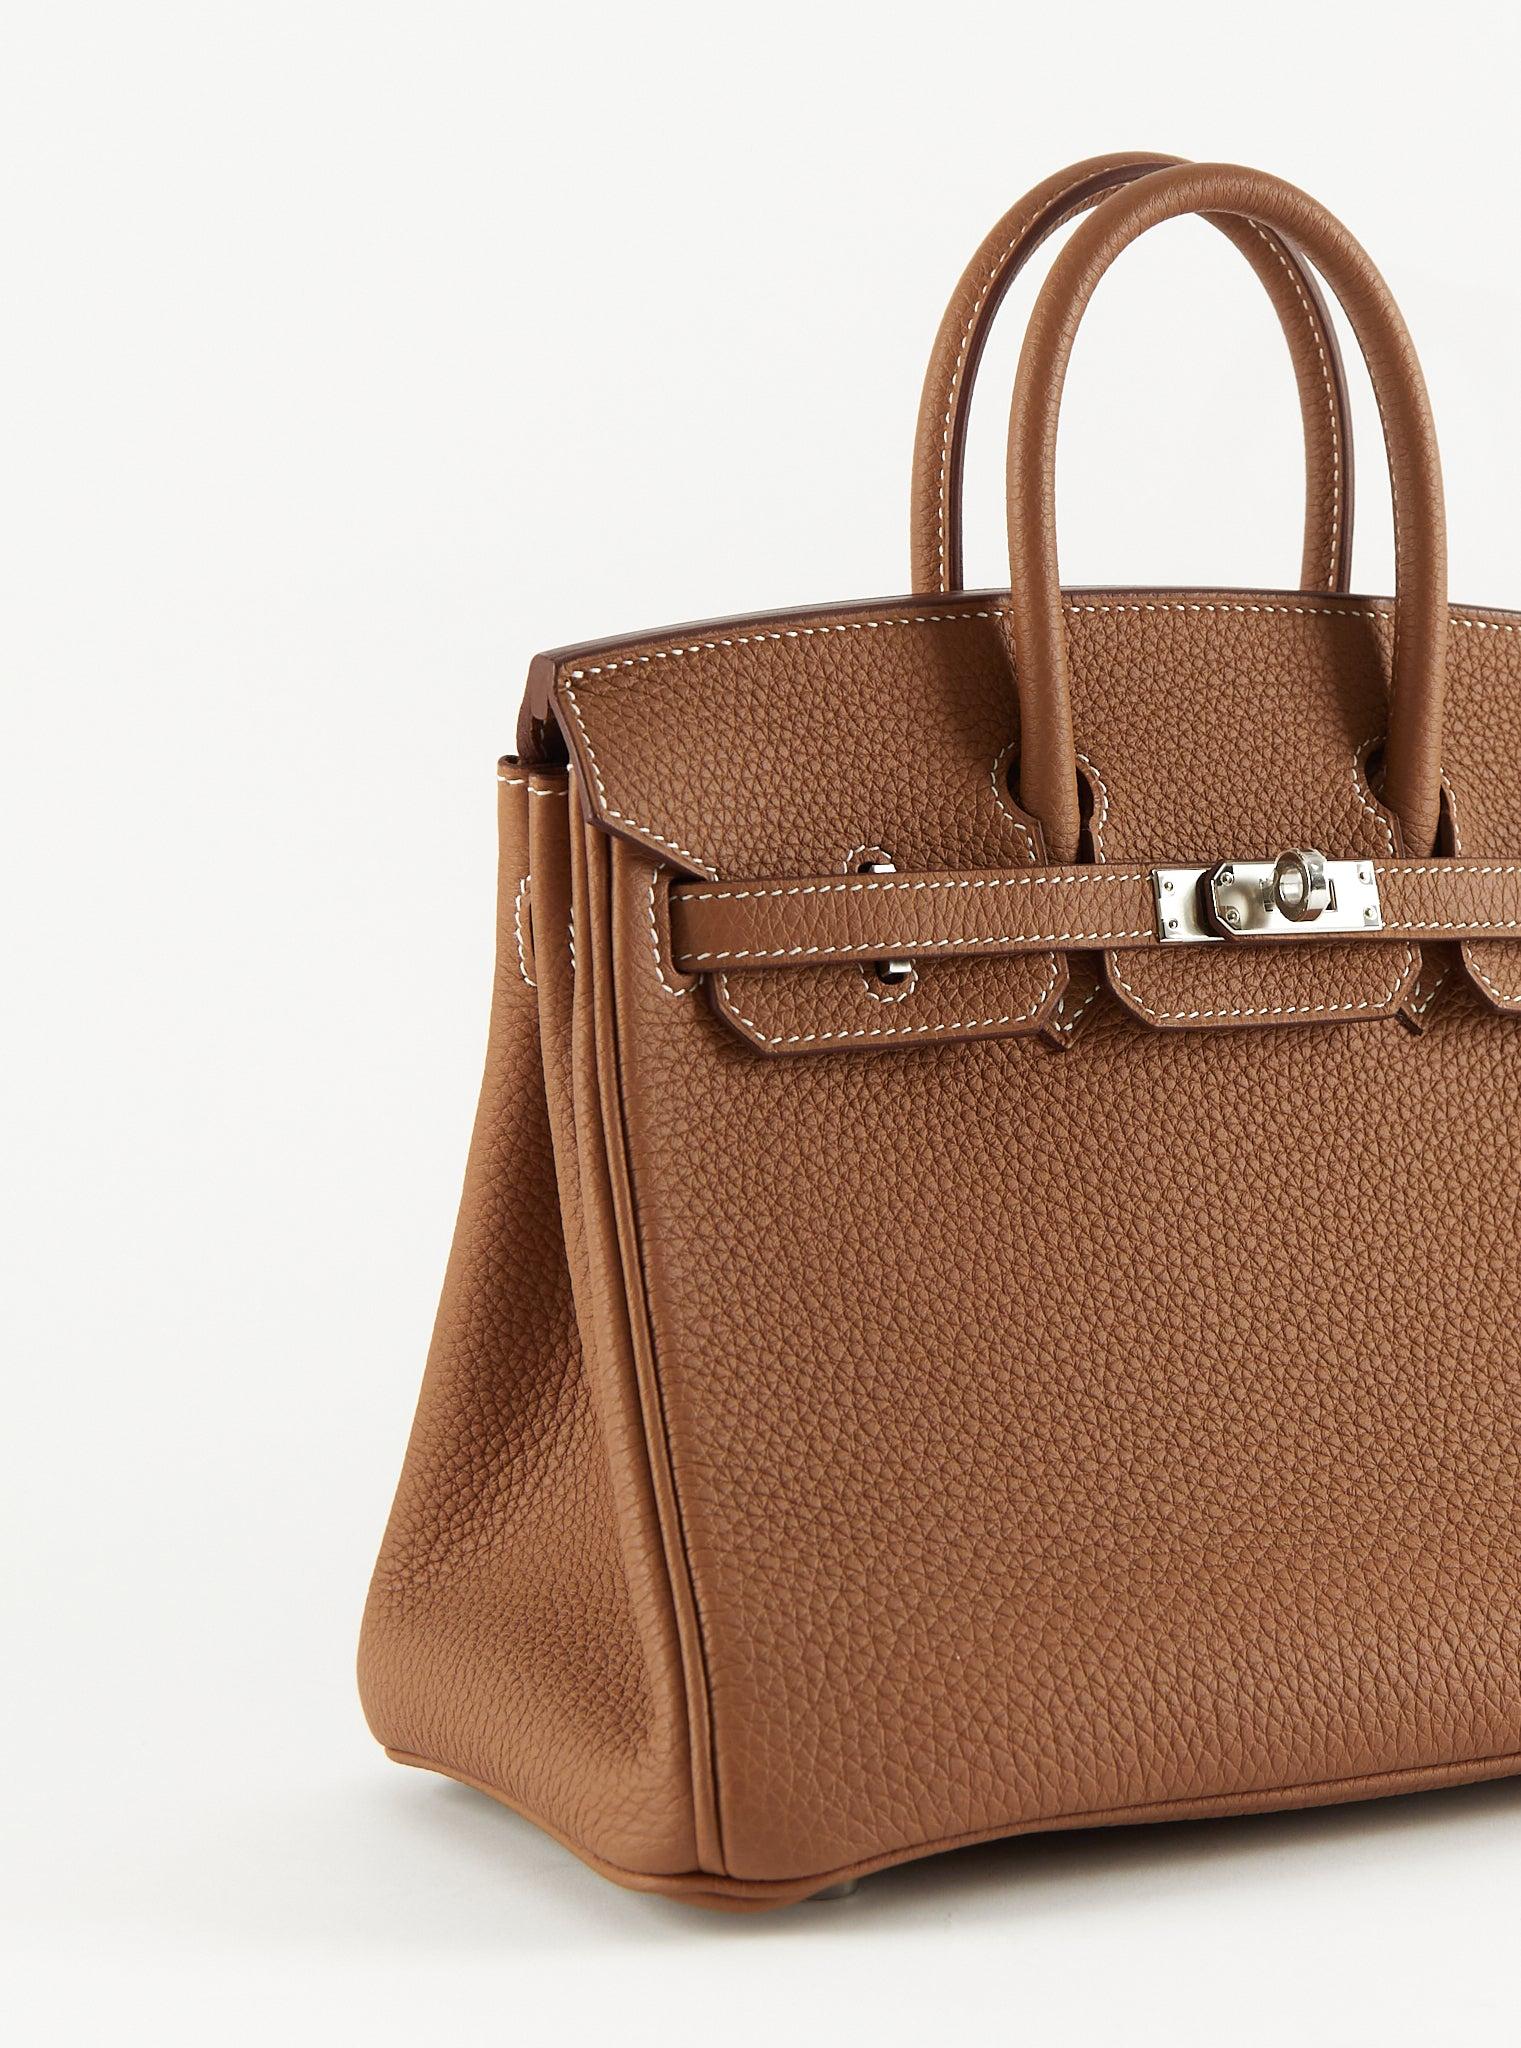 HERMÈS BIRKIN 25CM GOLD Togo Leather with Palladium Hardware In Excellent Condition For Sale In London, GB